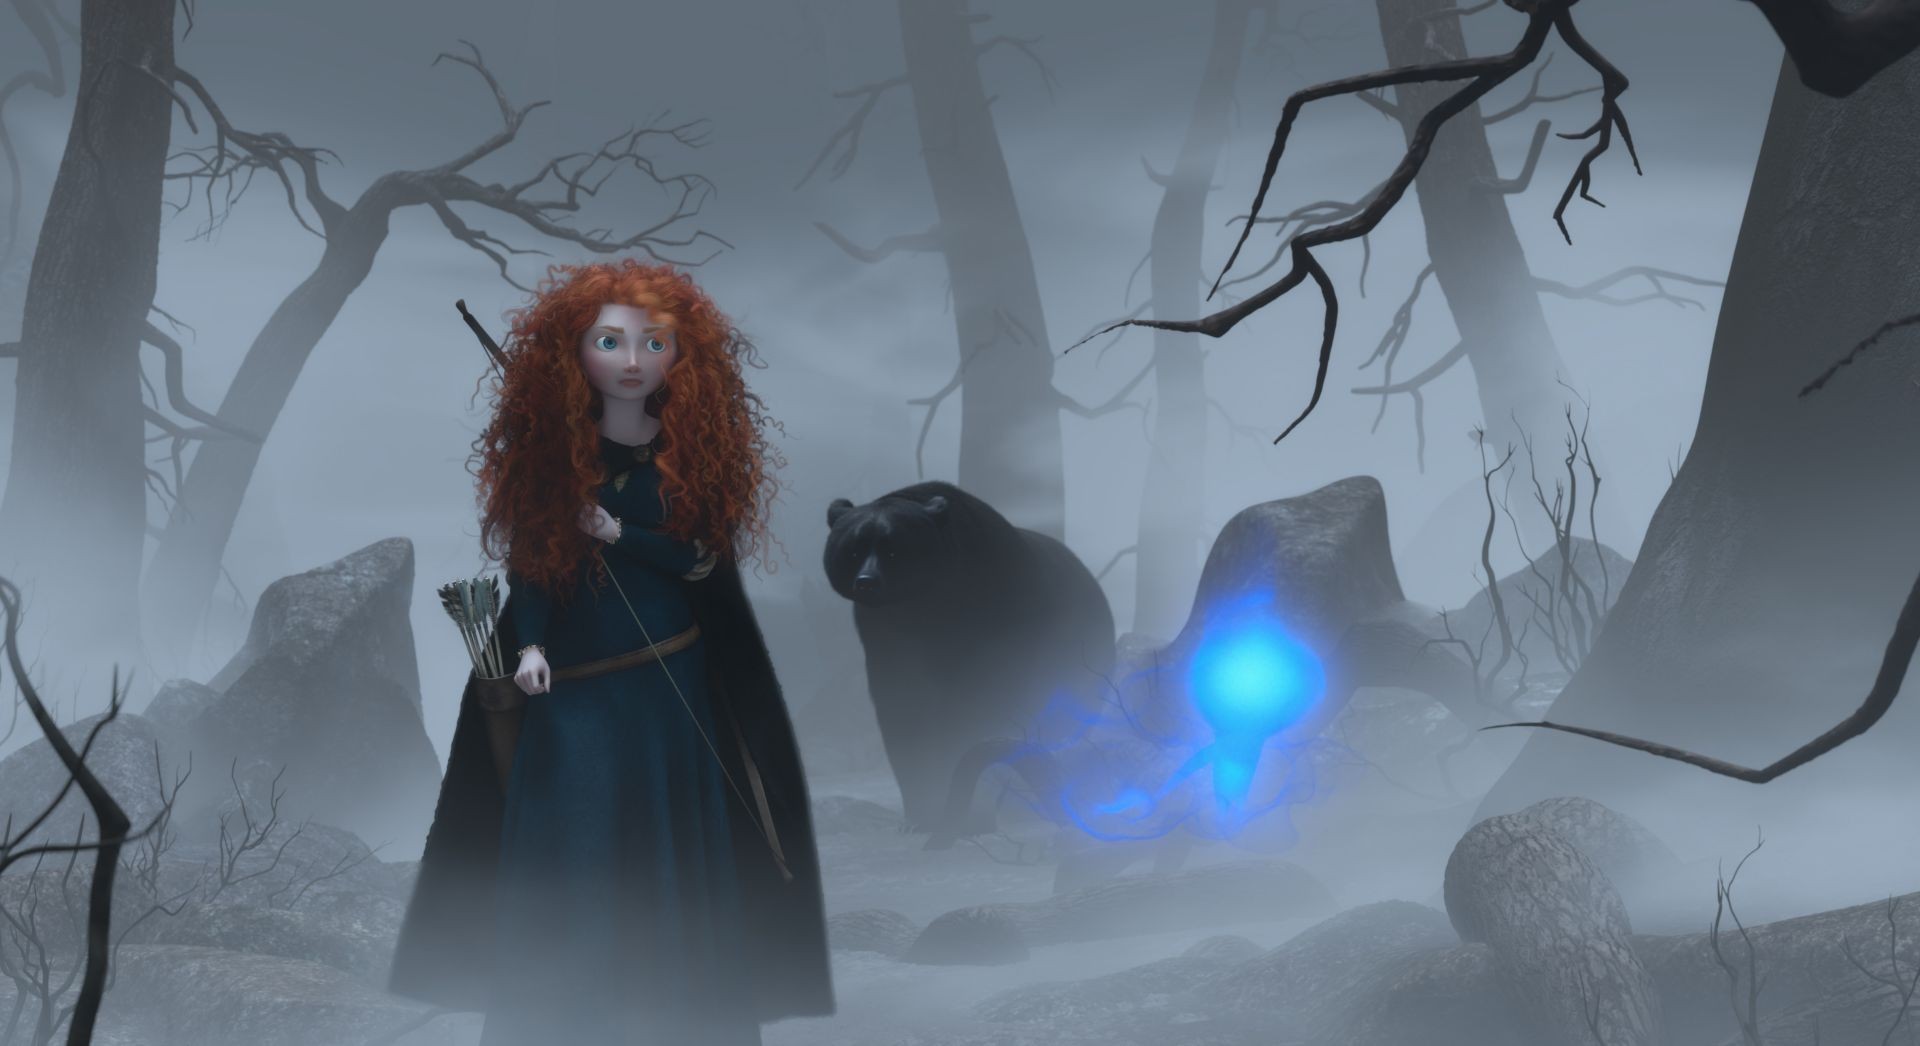 Princess Merida and The Wisps of Walt Disney Pictures' Brave (2012)